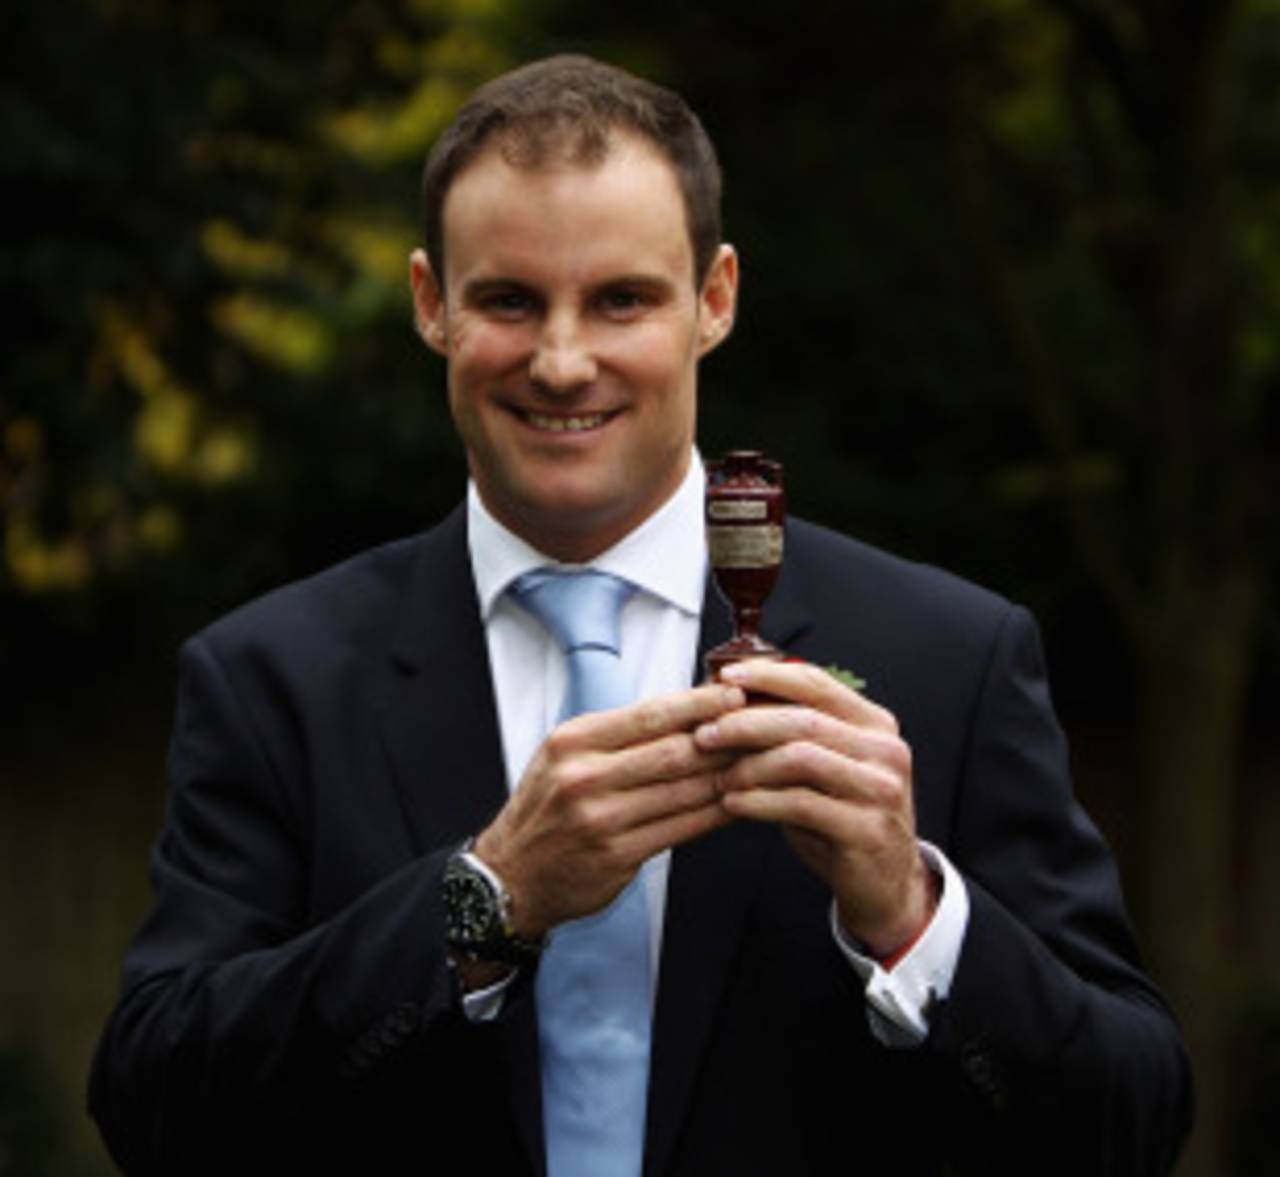 Andrew Strauss poses with the Ashes urn before heading to Australia, Lord's, October 28, 2010